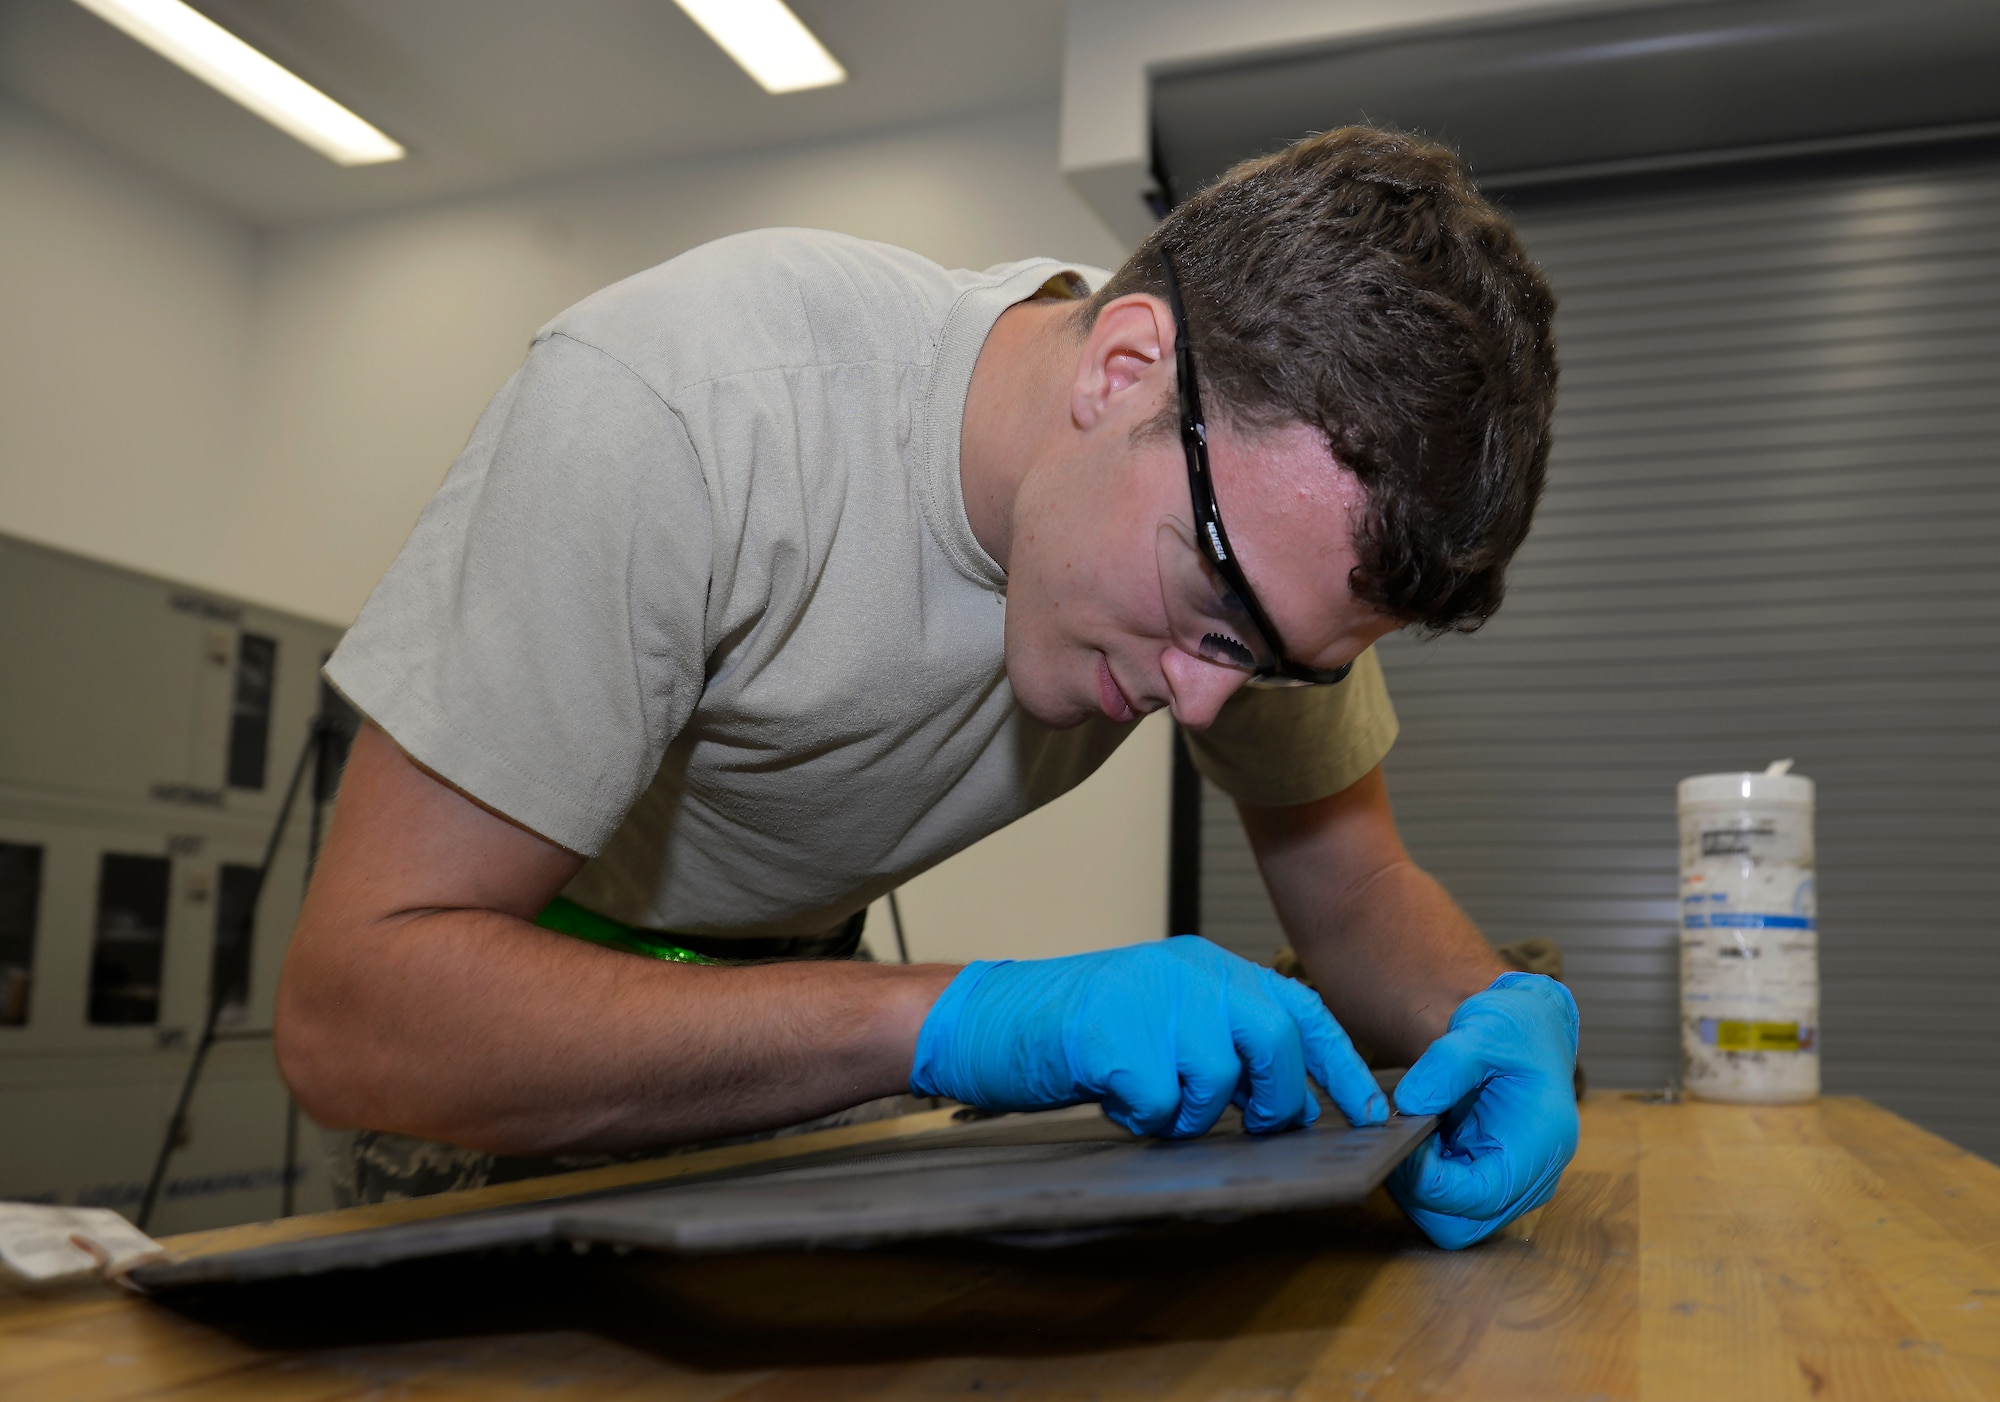 Senior Airman Tyler Quayle, 33rd Maintenance Squadron low observable maintenance journeyman, replaces a grommet on an F-35A Lightning II panel at Eglin Air Force Base, Fla., April 28, 2016. After cleaning the panel slots, Quayle places the grommet into the slot to ensure it fits properly. (U.S. Air Force photo/Senior Airman Andrea Posey)